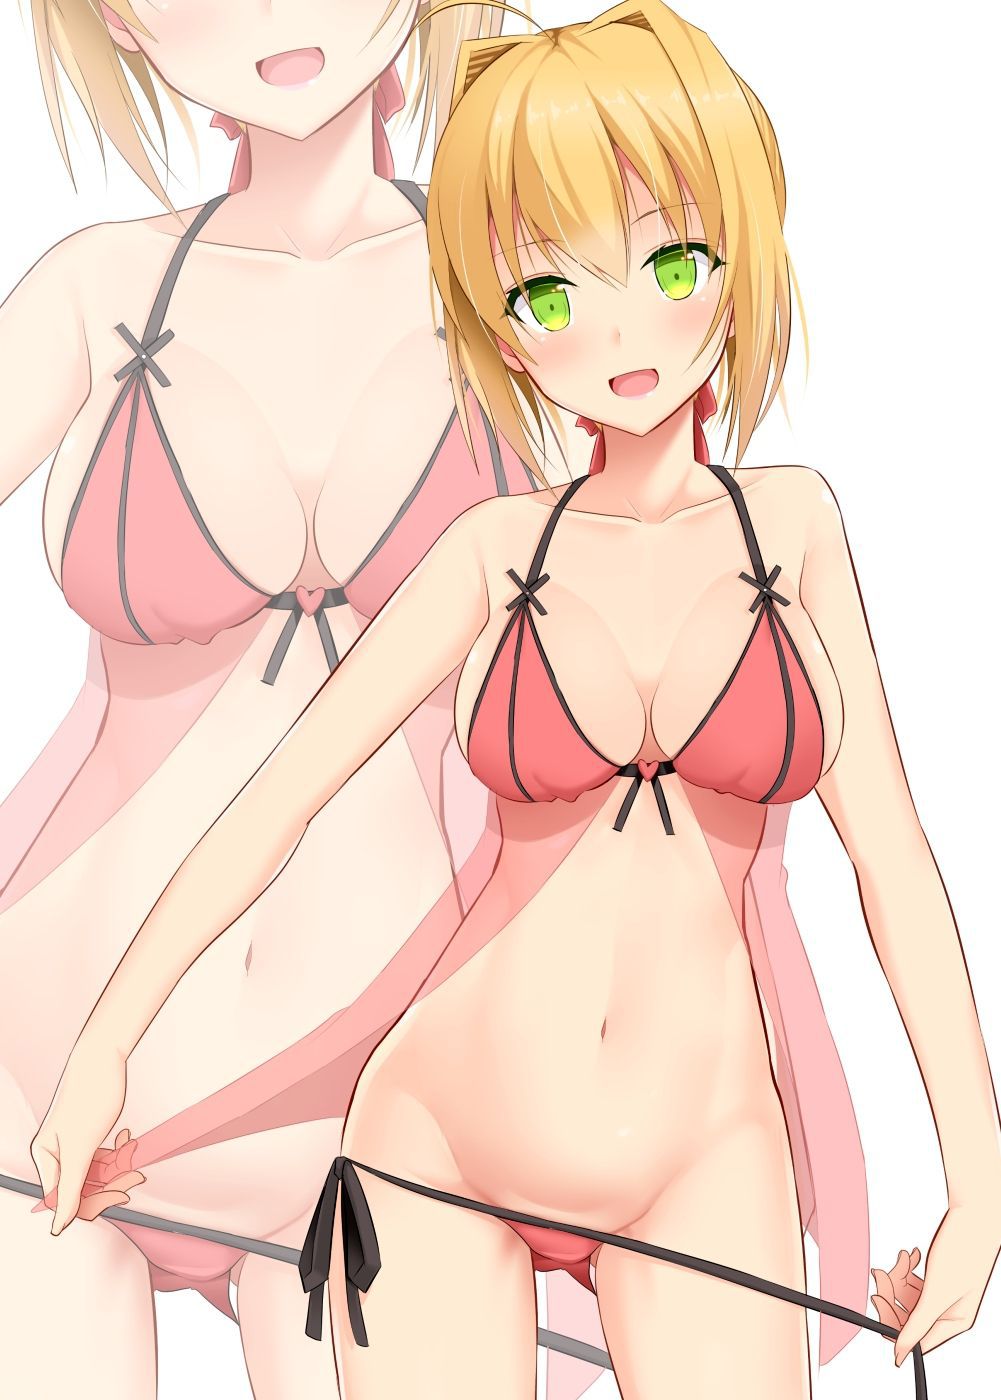 [Secondary ZIP] is about to start anime 100 pieces of cute image summary of Nero Claudius so soon 79